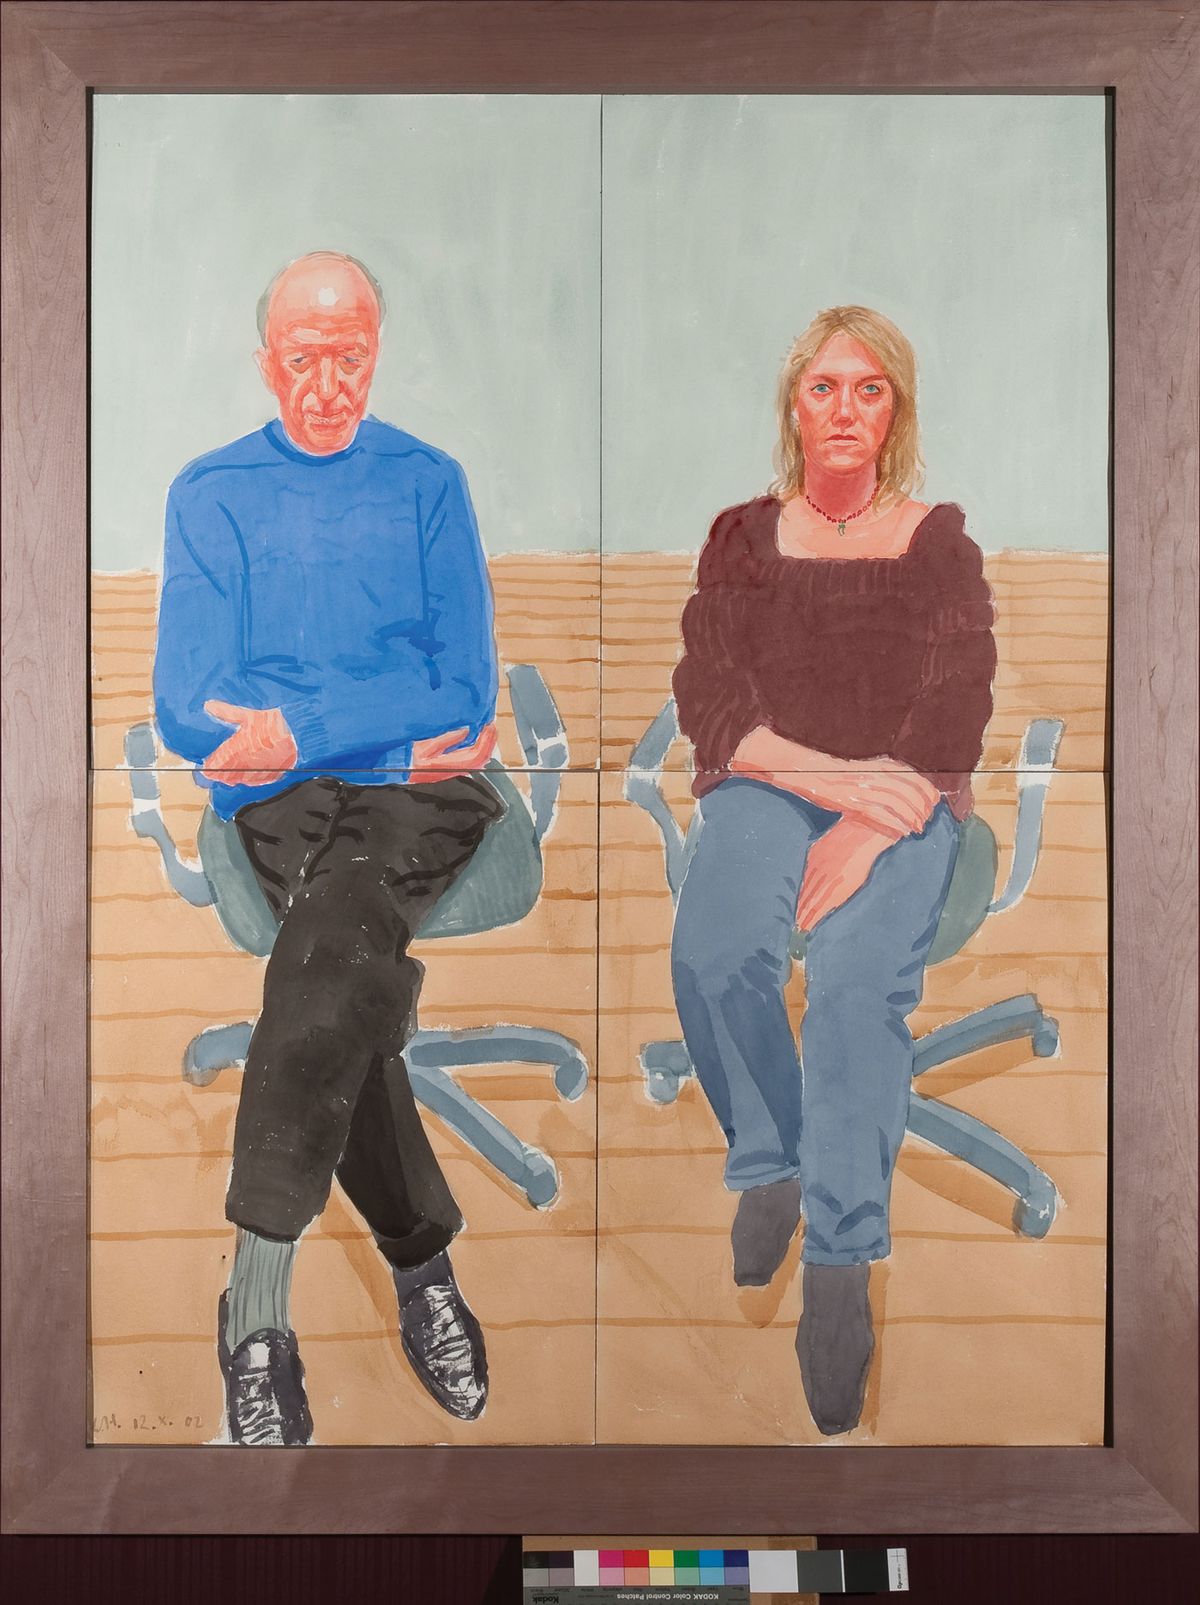 Father and daughter: David Hockney, Jacob and Hannah Rothschild (2002), water colour on paper Waddesdon; The Rothschild Collection (Rothschild Family Trusts) Photo: © David Hockney, Prudence Cuming Associates